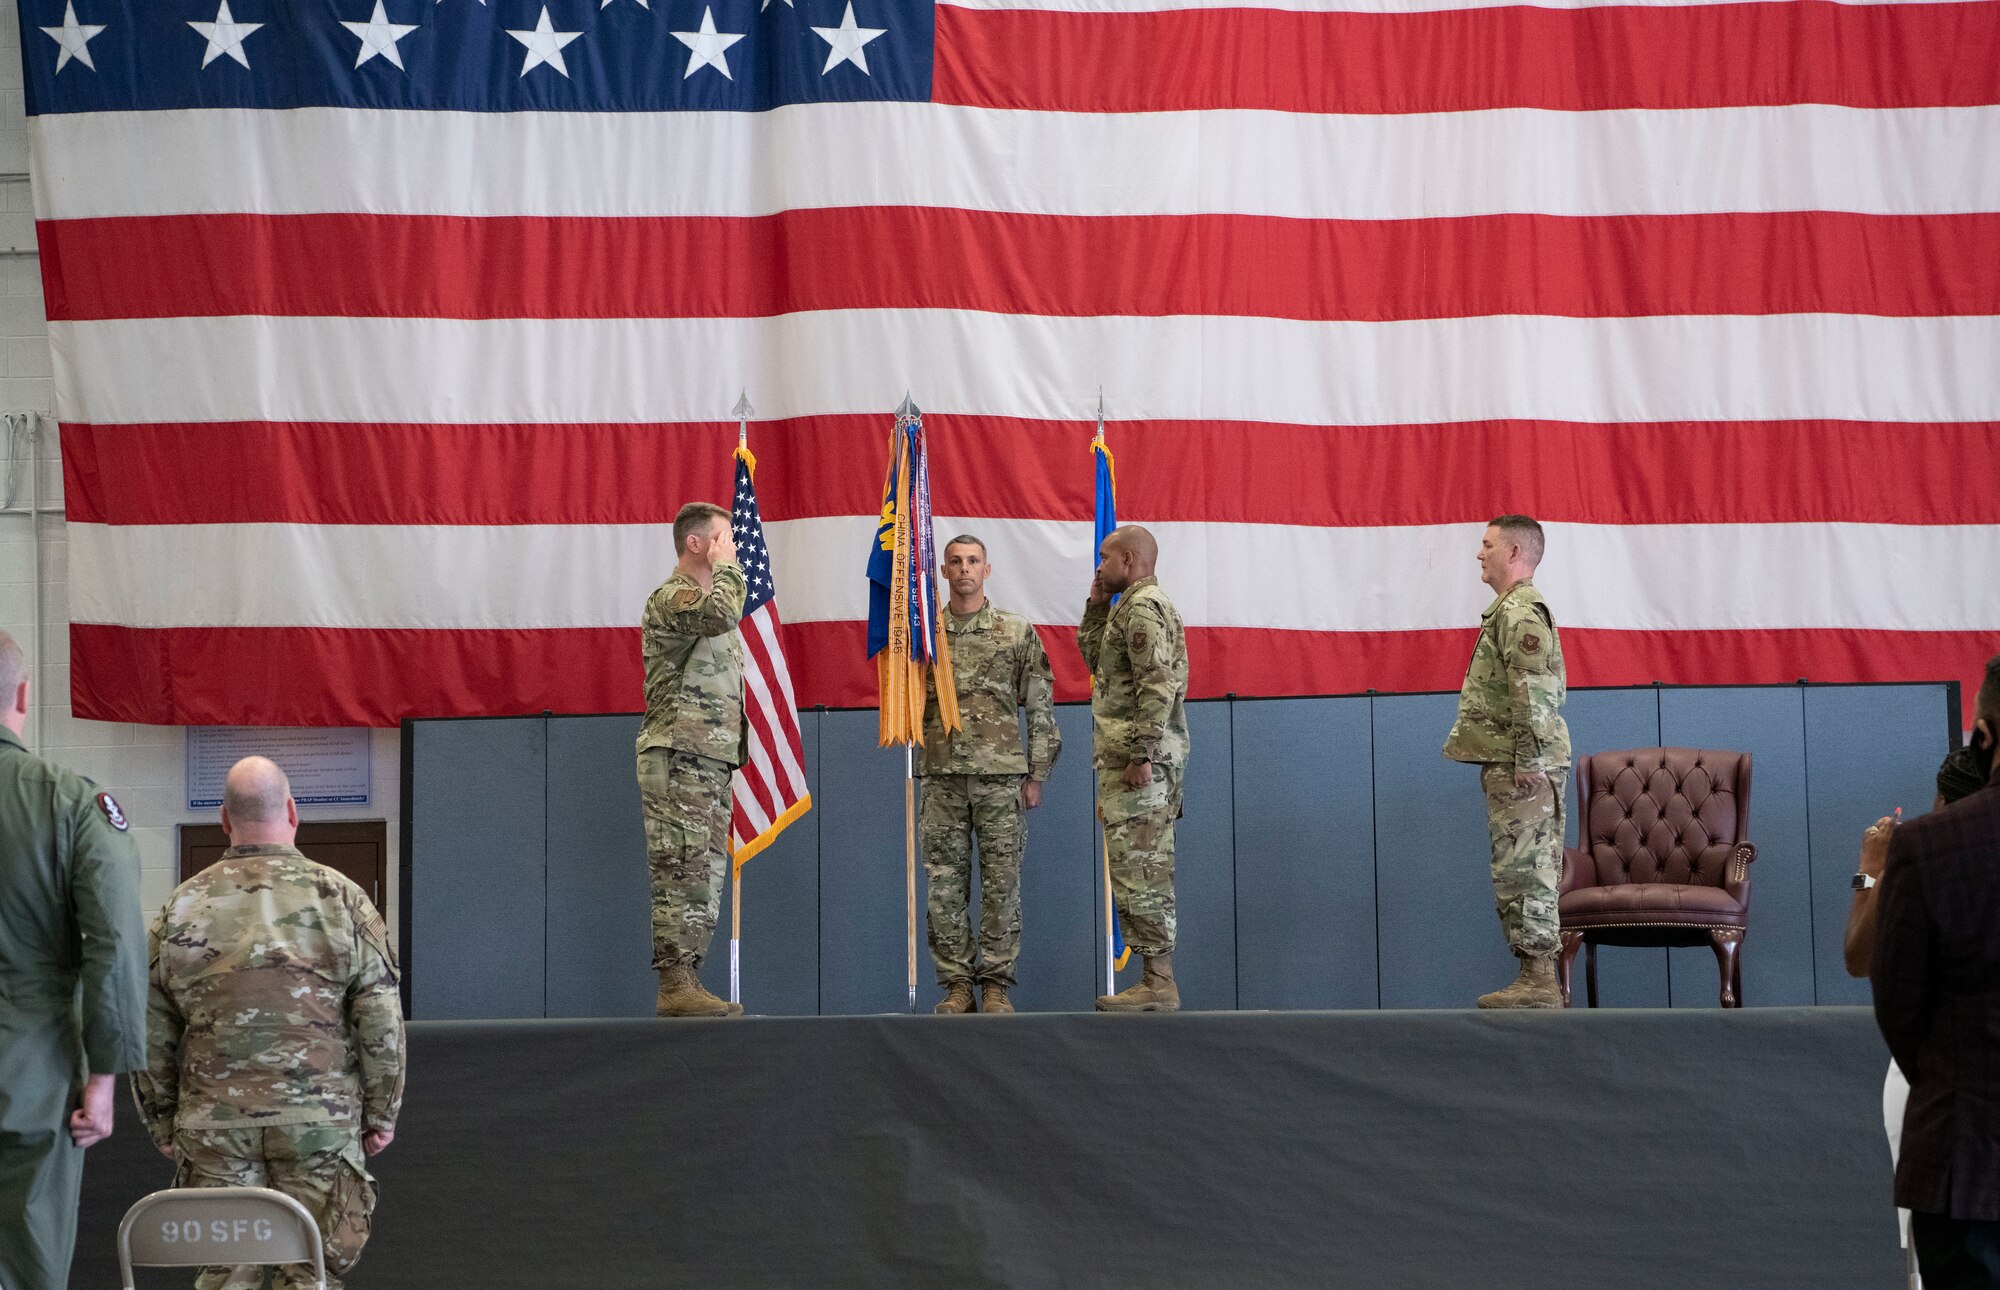 Colonel Peter Bonetti, 90th Missile Wing commander, salutes, Colonel Tytonia Moore, 90th Operations Group incoming commander, as he assumes command of the 90th OG during a change of command ceremony June, 26, 2020, on F.E. Warren Air Force Base, Wyo. A change of command ceremony is a tradition that represents a formal transfer of authority and responsibility from the outgoing commander to the incoming commander. (U.S. Air Force photo by Senior Airman Braydon Williams)